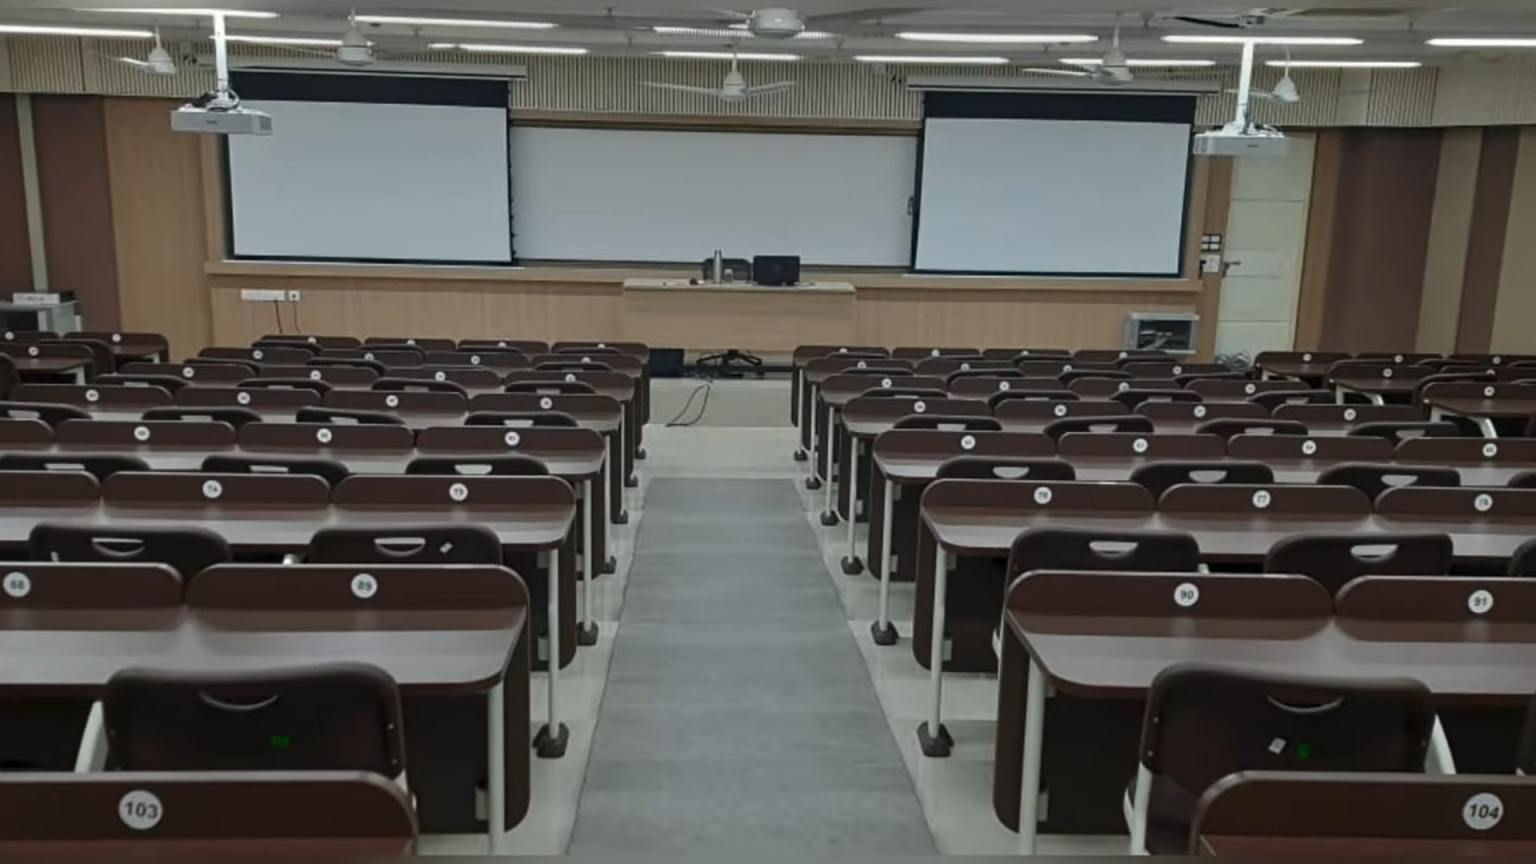 SJMSoM IIT Bombay : Campus, Cutoff, Eligibility, Placement, More! - iQuanta